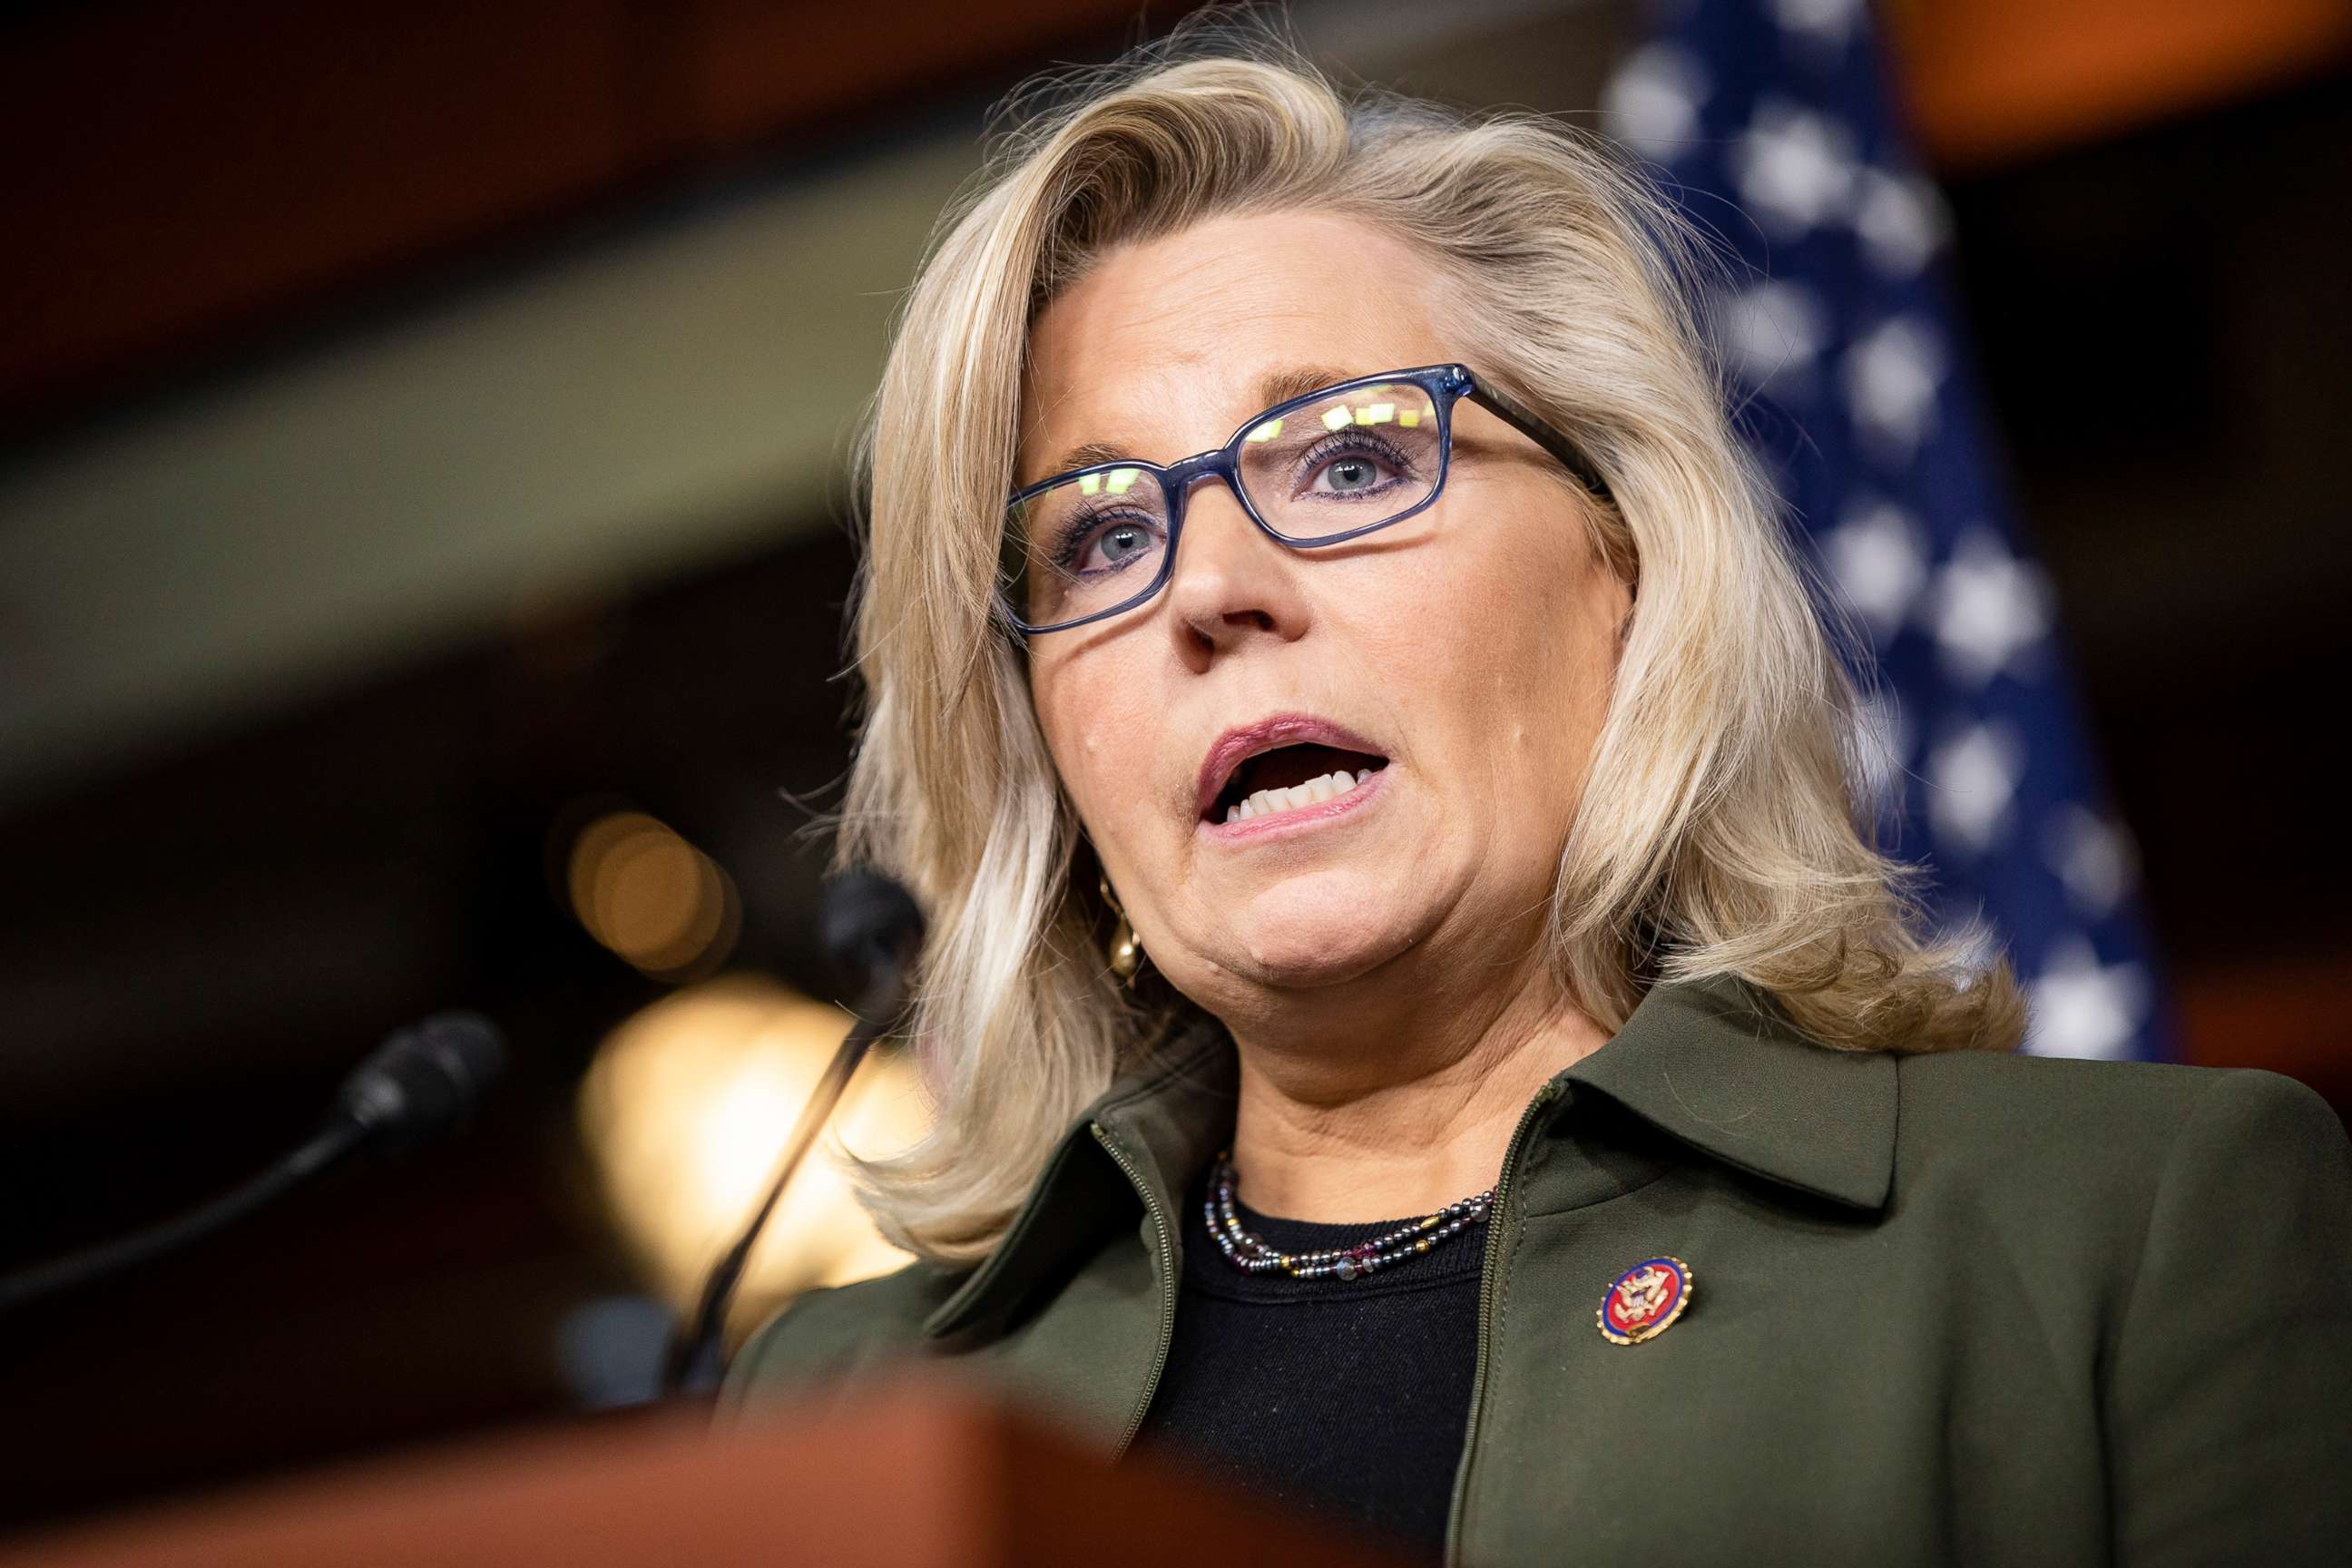 PHOTO: Rep. Liz Cheney speaks during a press conference at the US Capitol on Dec. 17, 2019, in Washington.